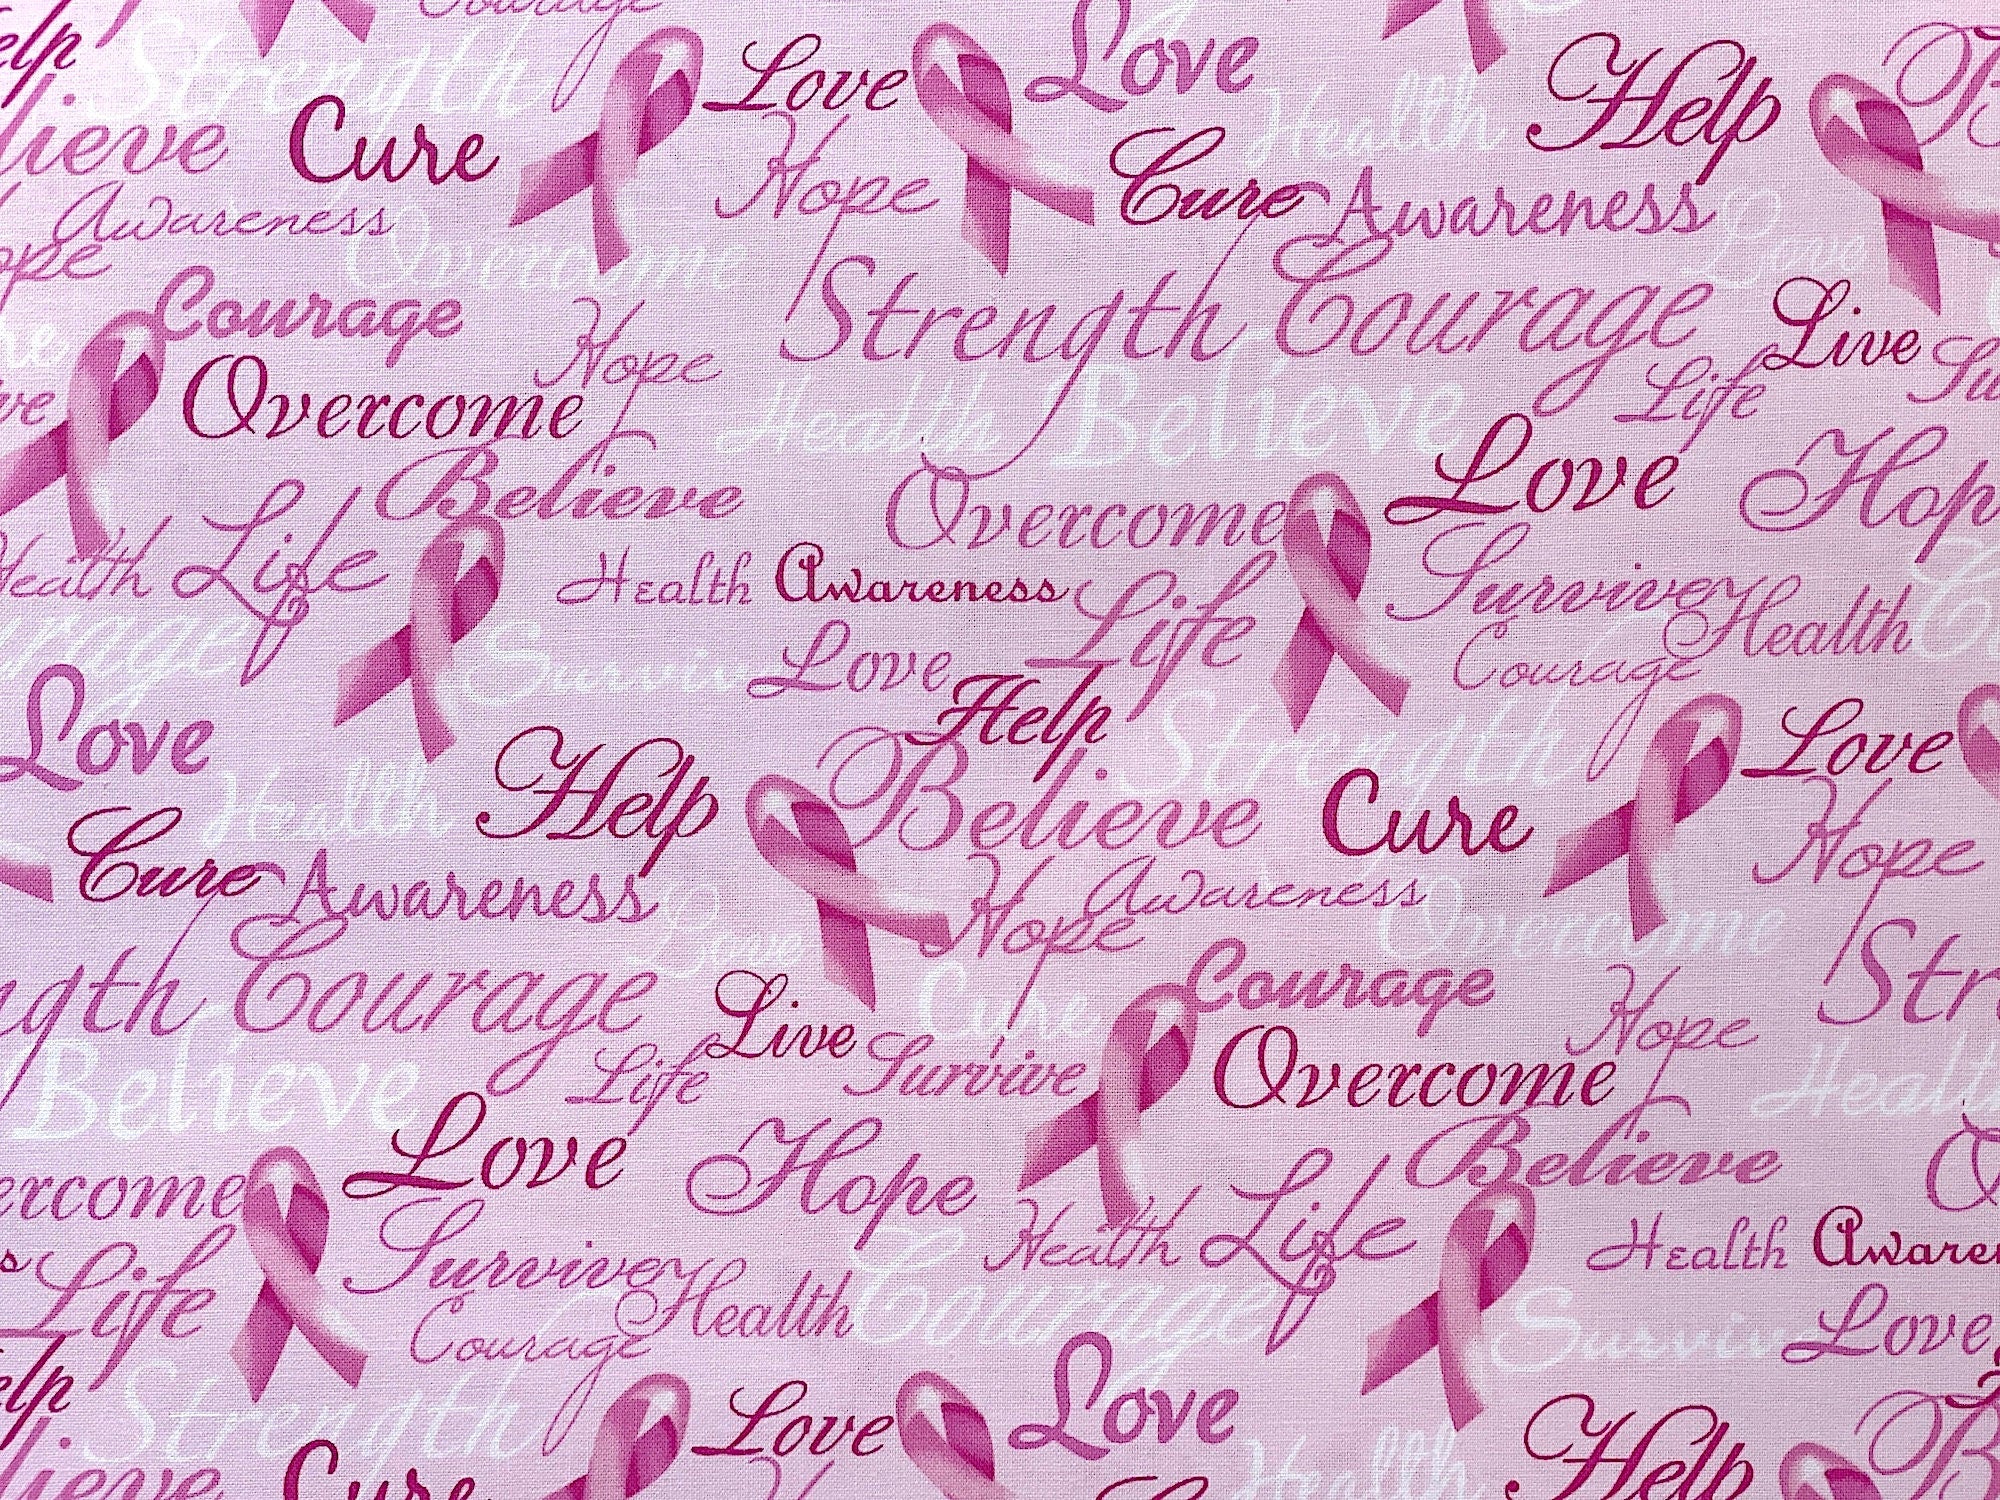 Close up of sayings such as overcome, life, love, help, cure, awareness and more.